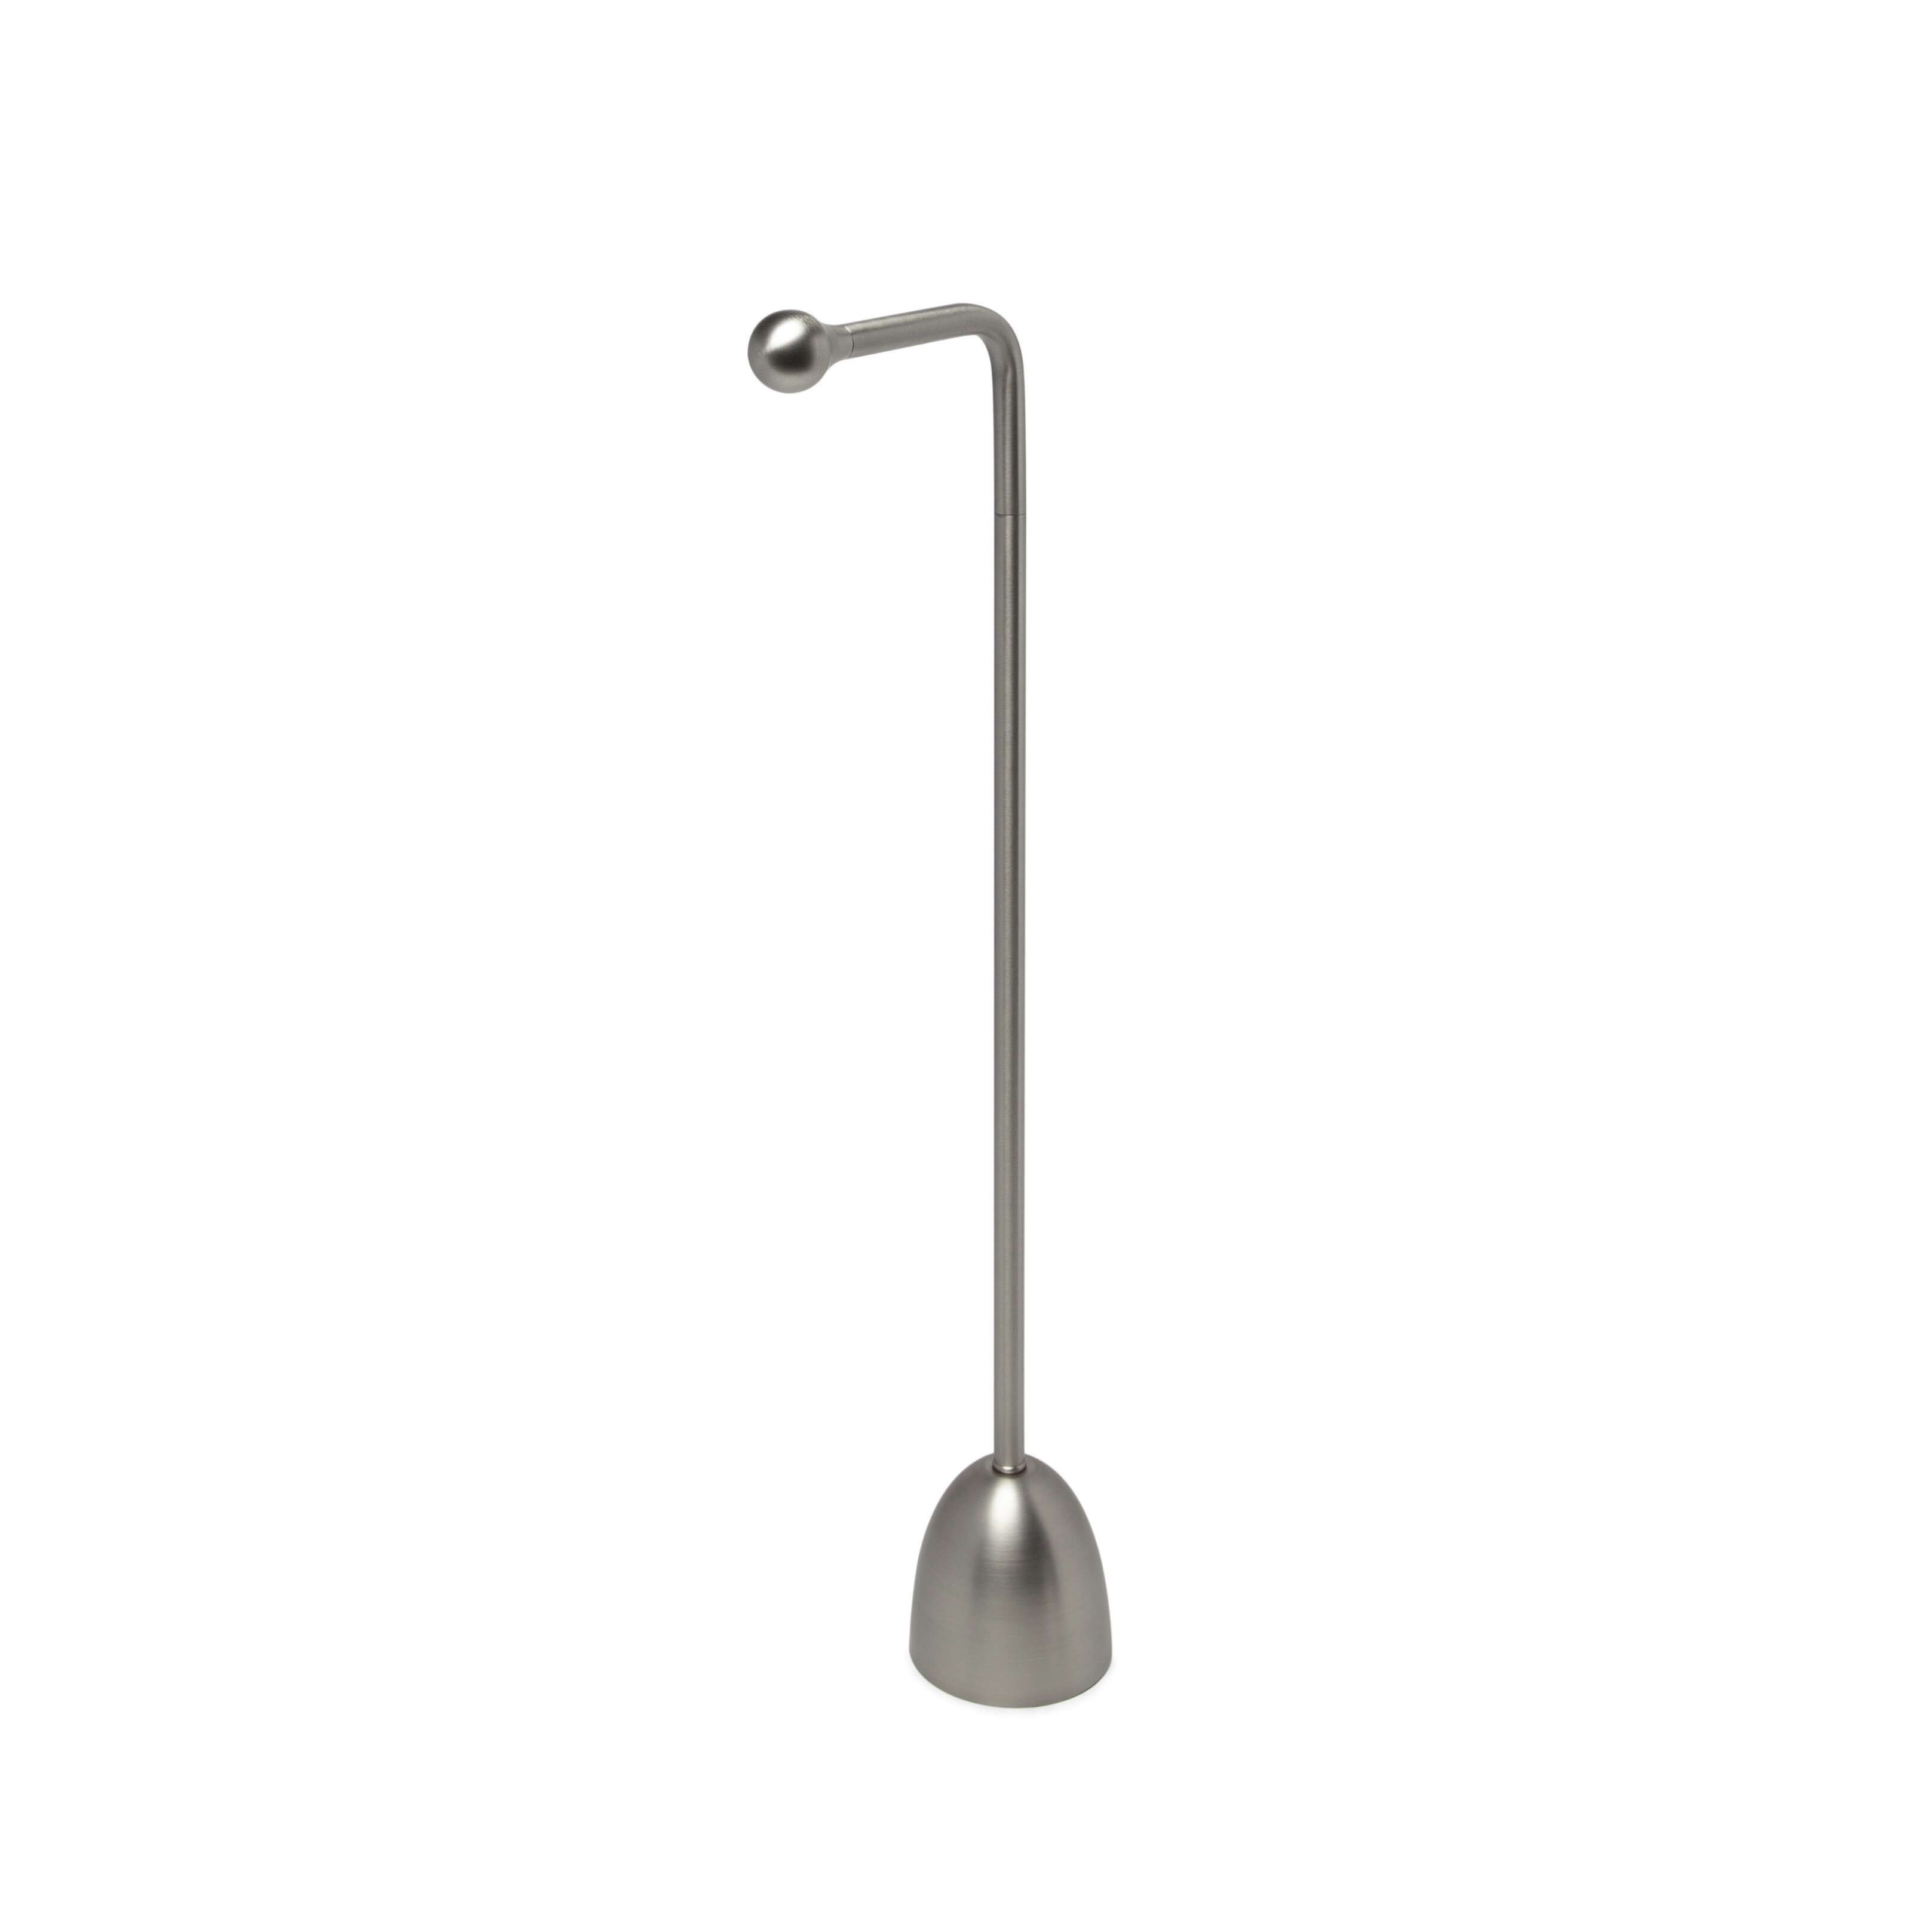 Umbra Teardrop Free Standing Toilet Paper Holder Stand and Holder with Storage for up to 5 TP Rolls Brushed Nickel